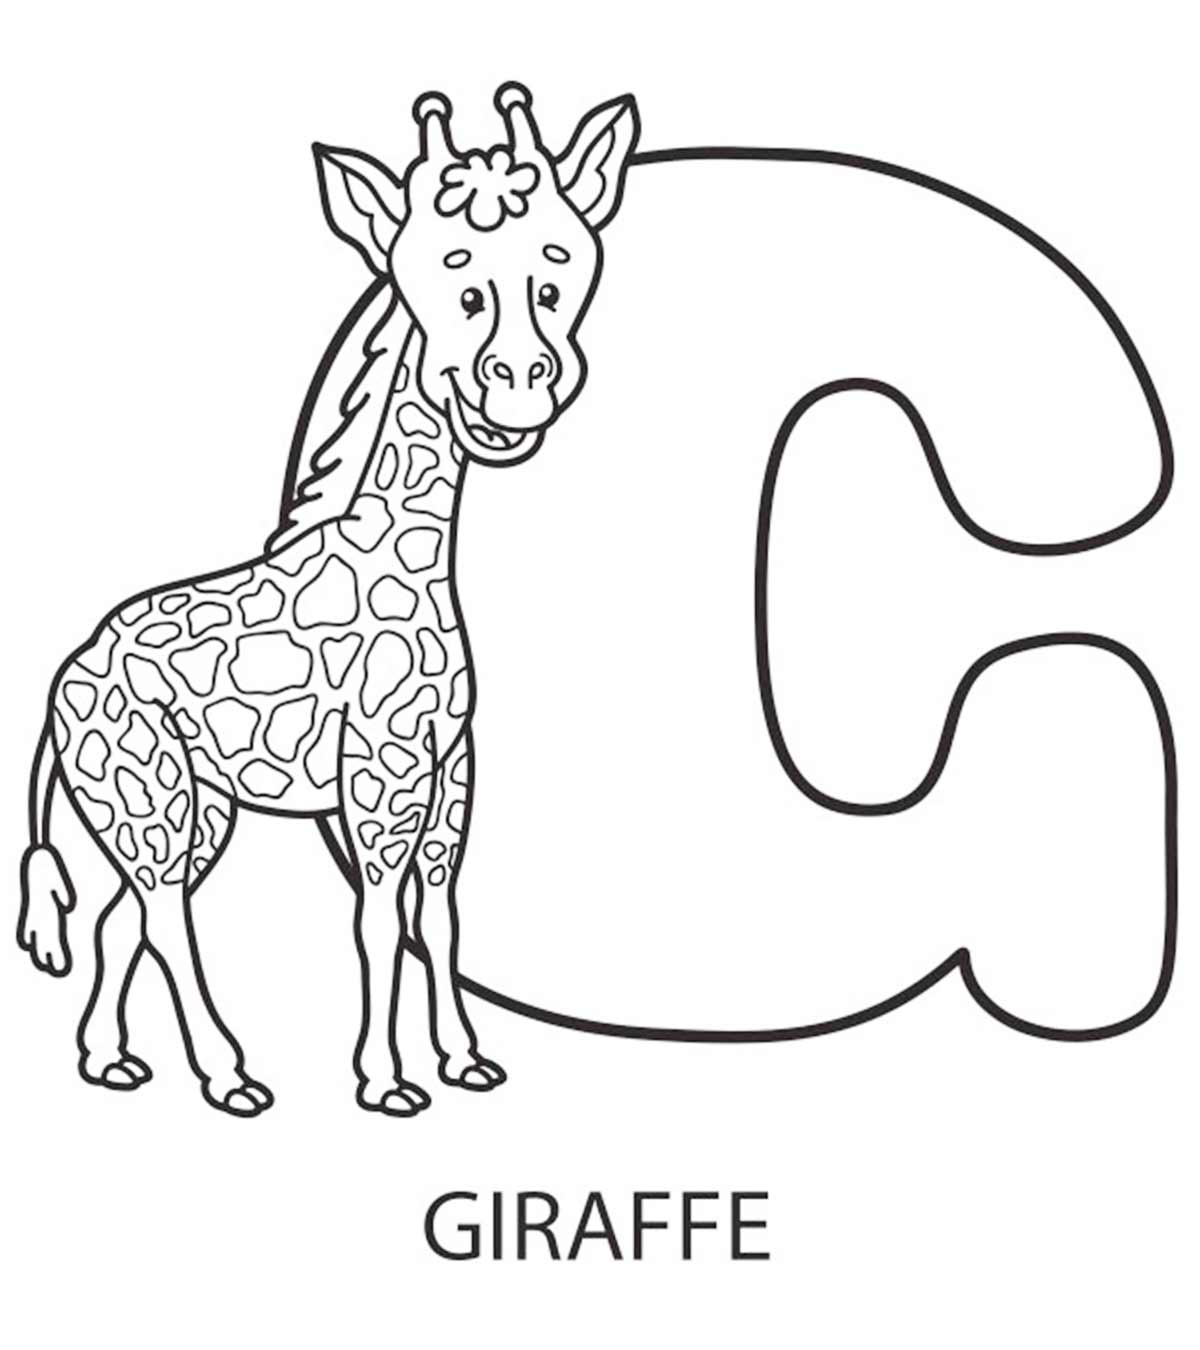 50 Alphabet Coloring Pages Your Toddler Will Love